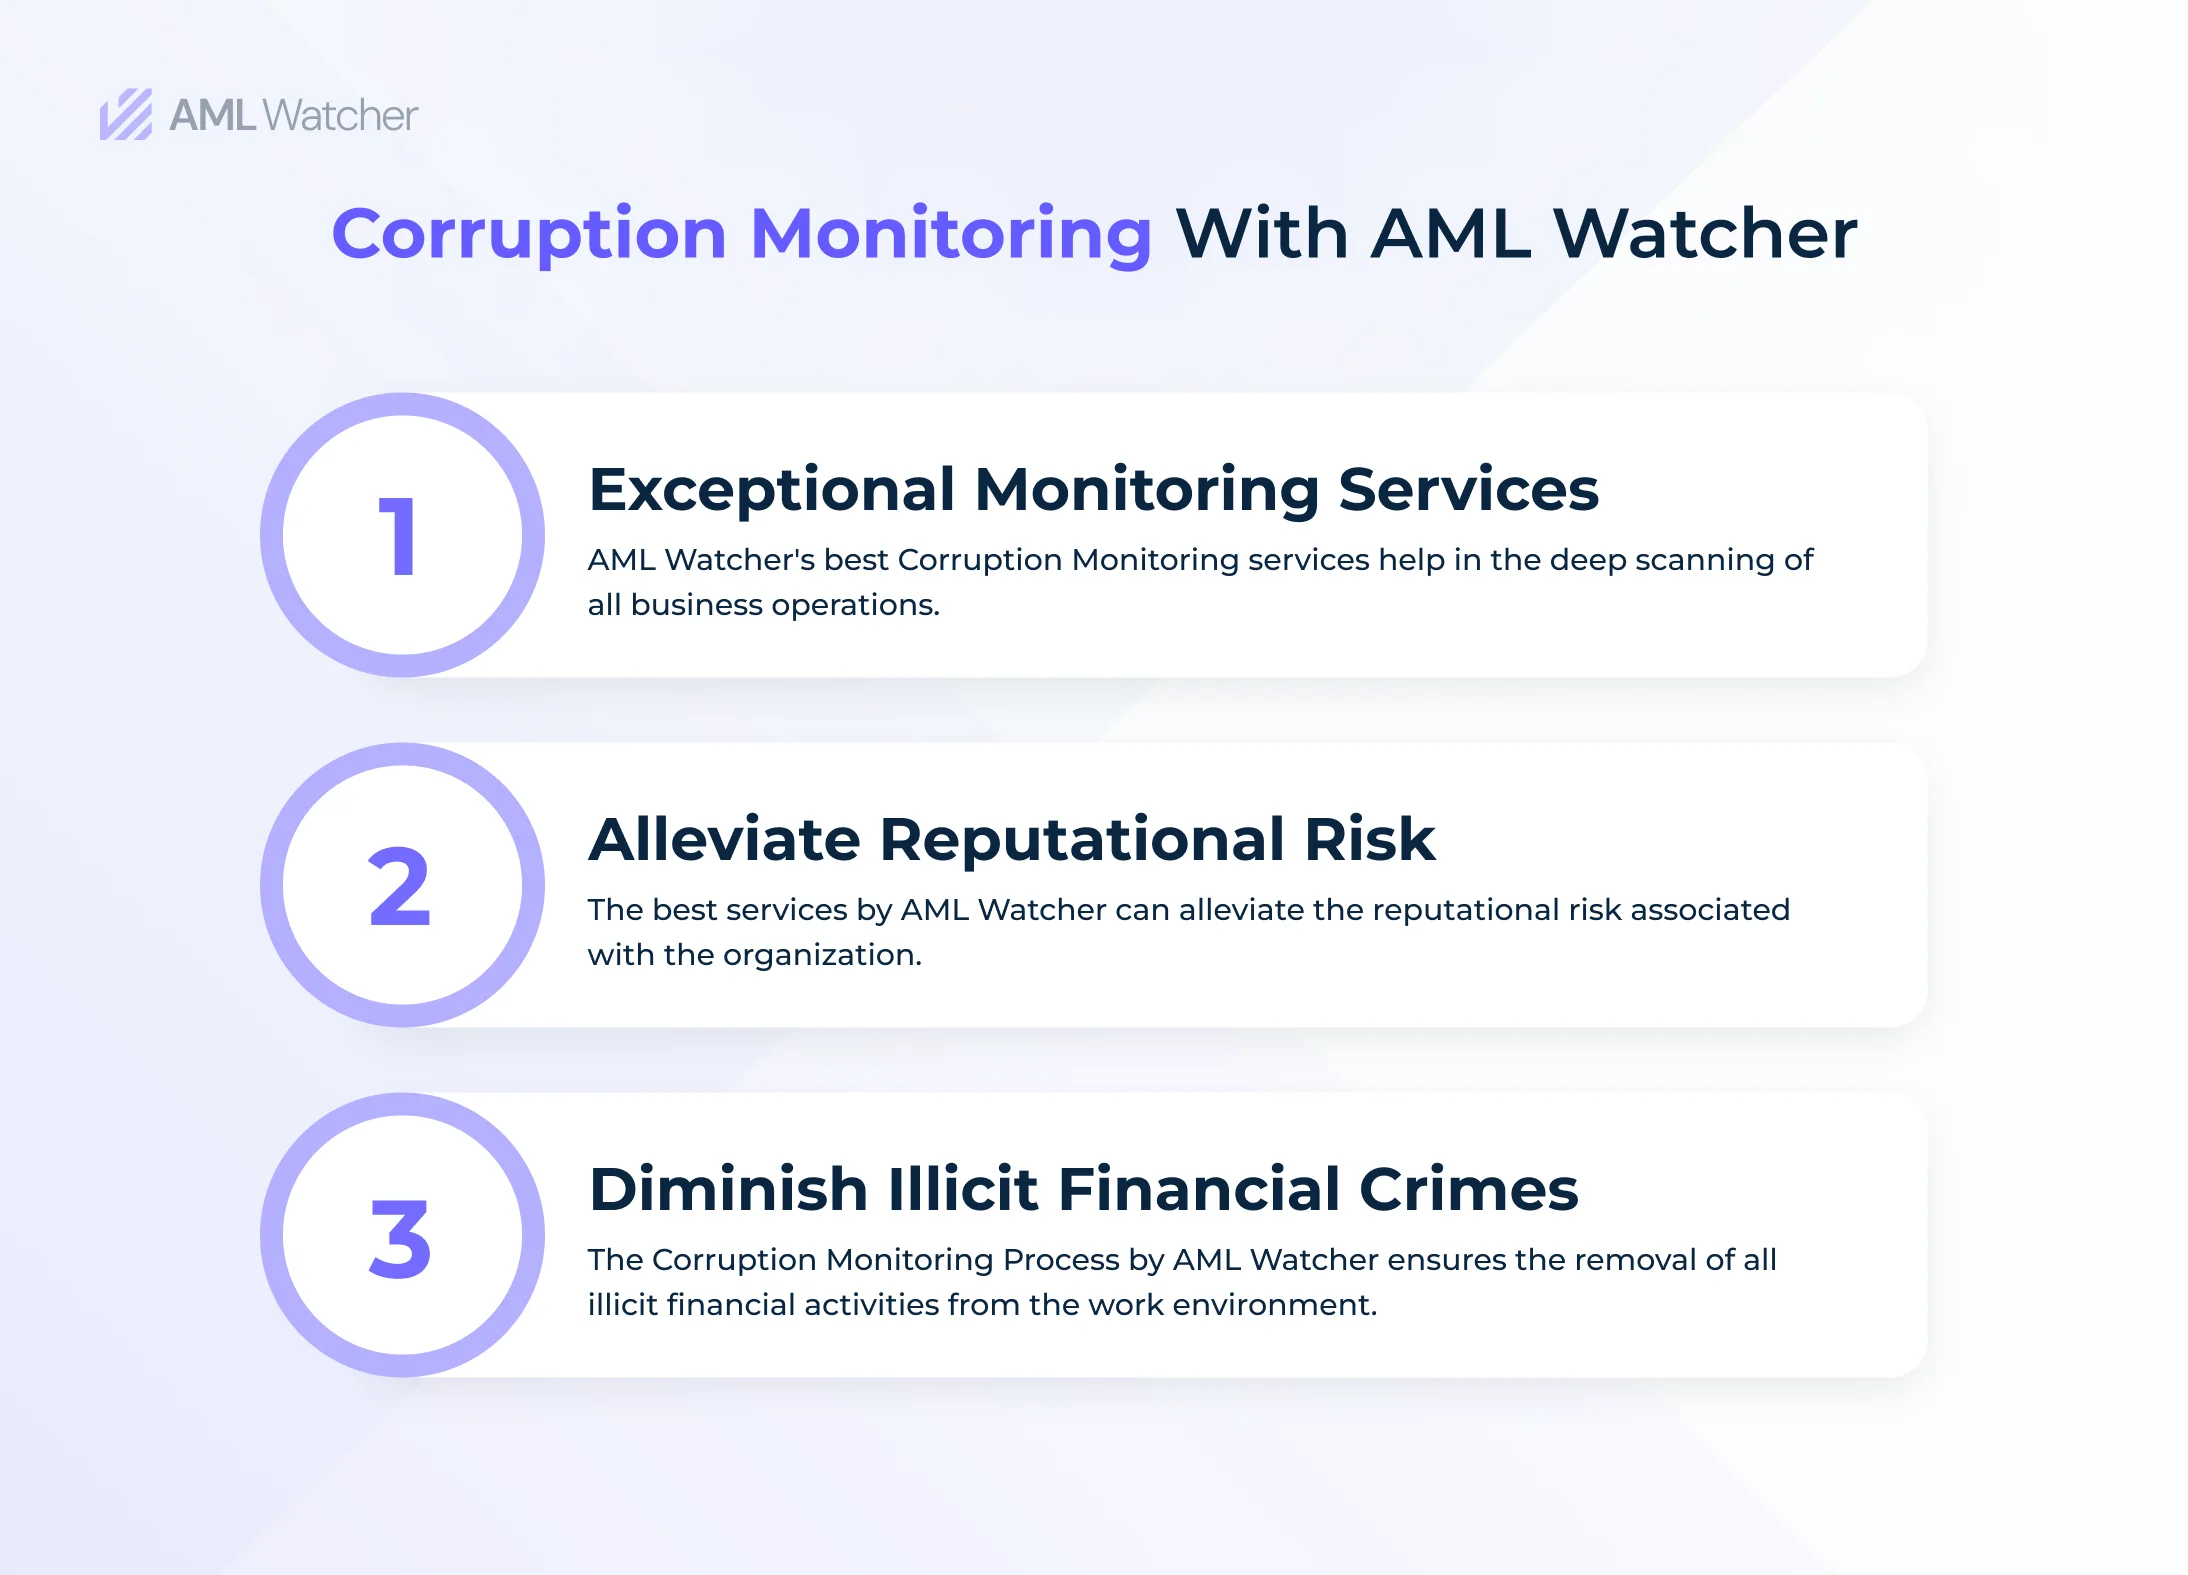 AML Watcher is providing huge benefits with their exceptional corruption monitoring services.